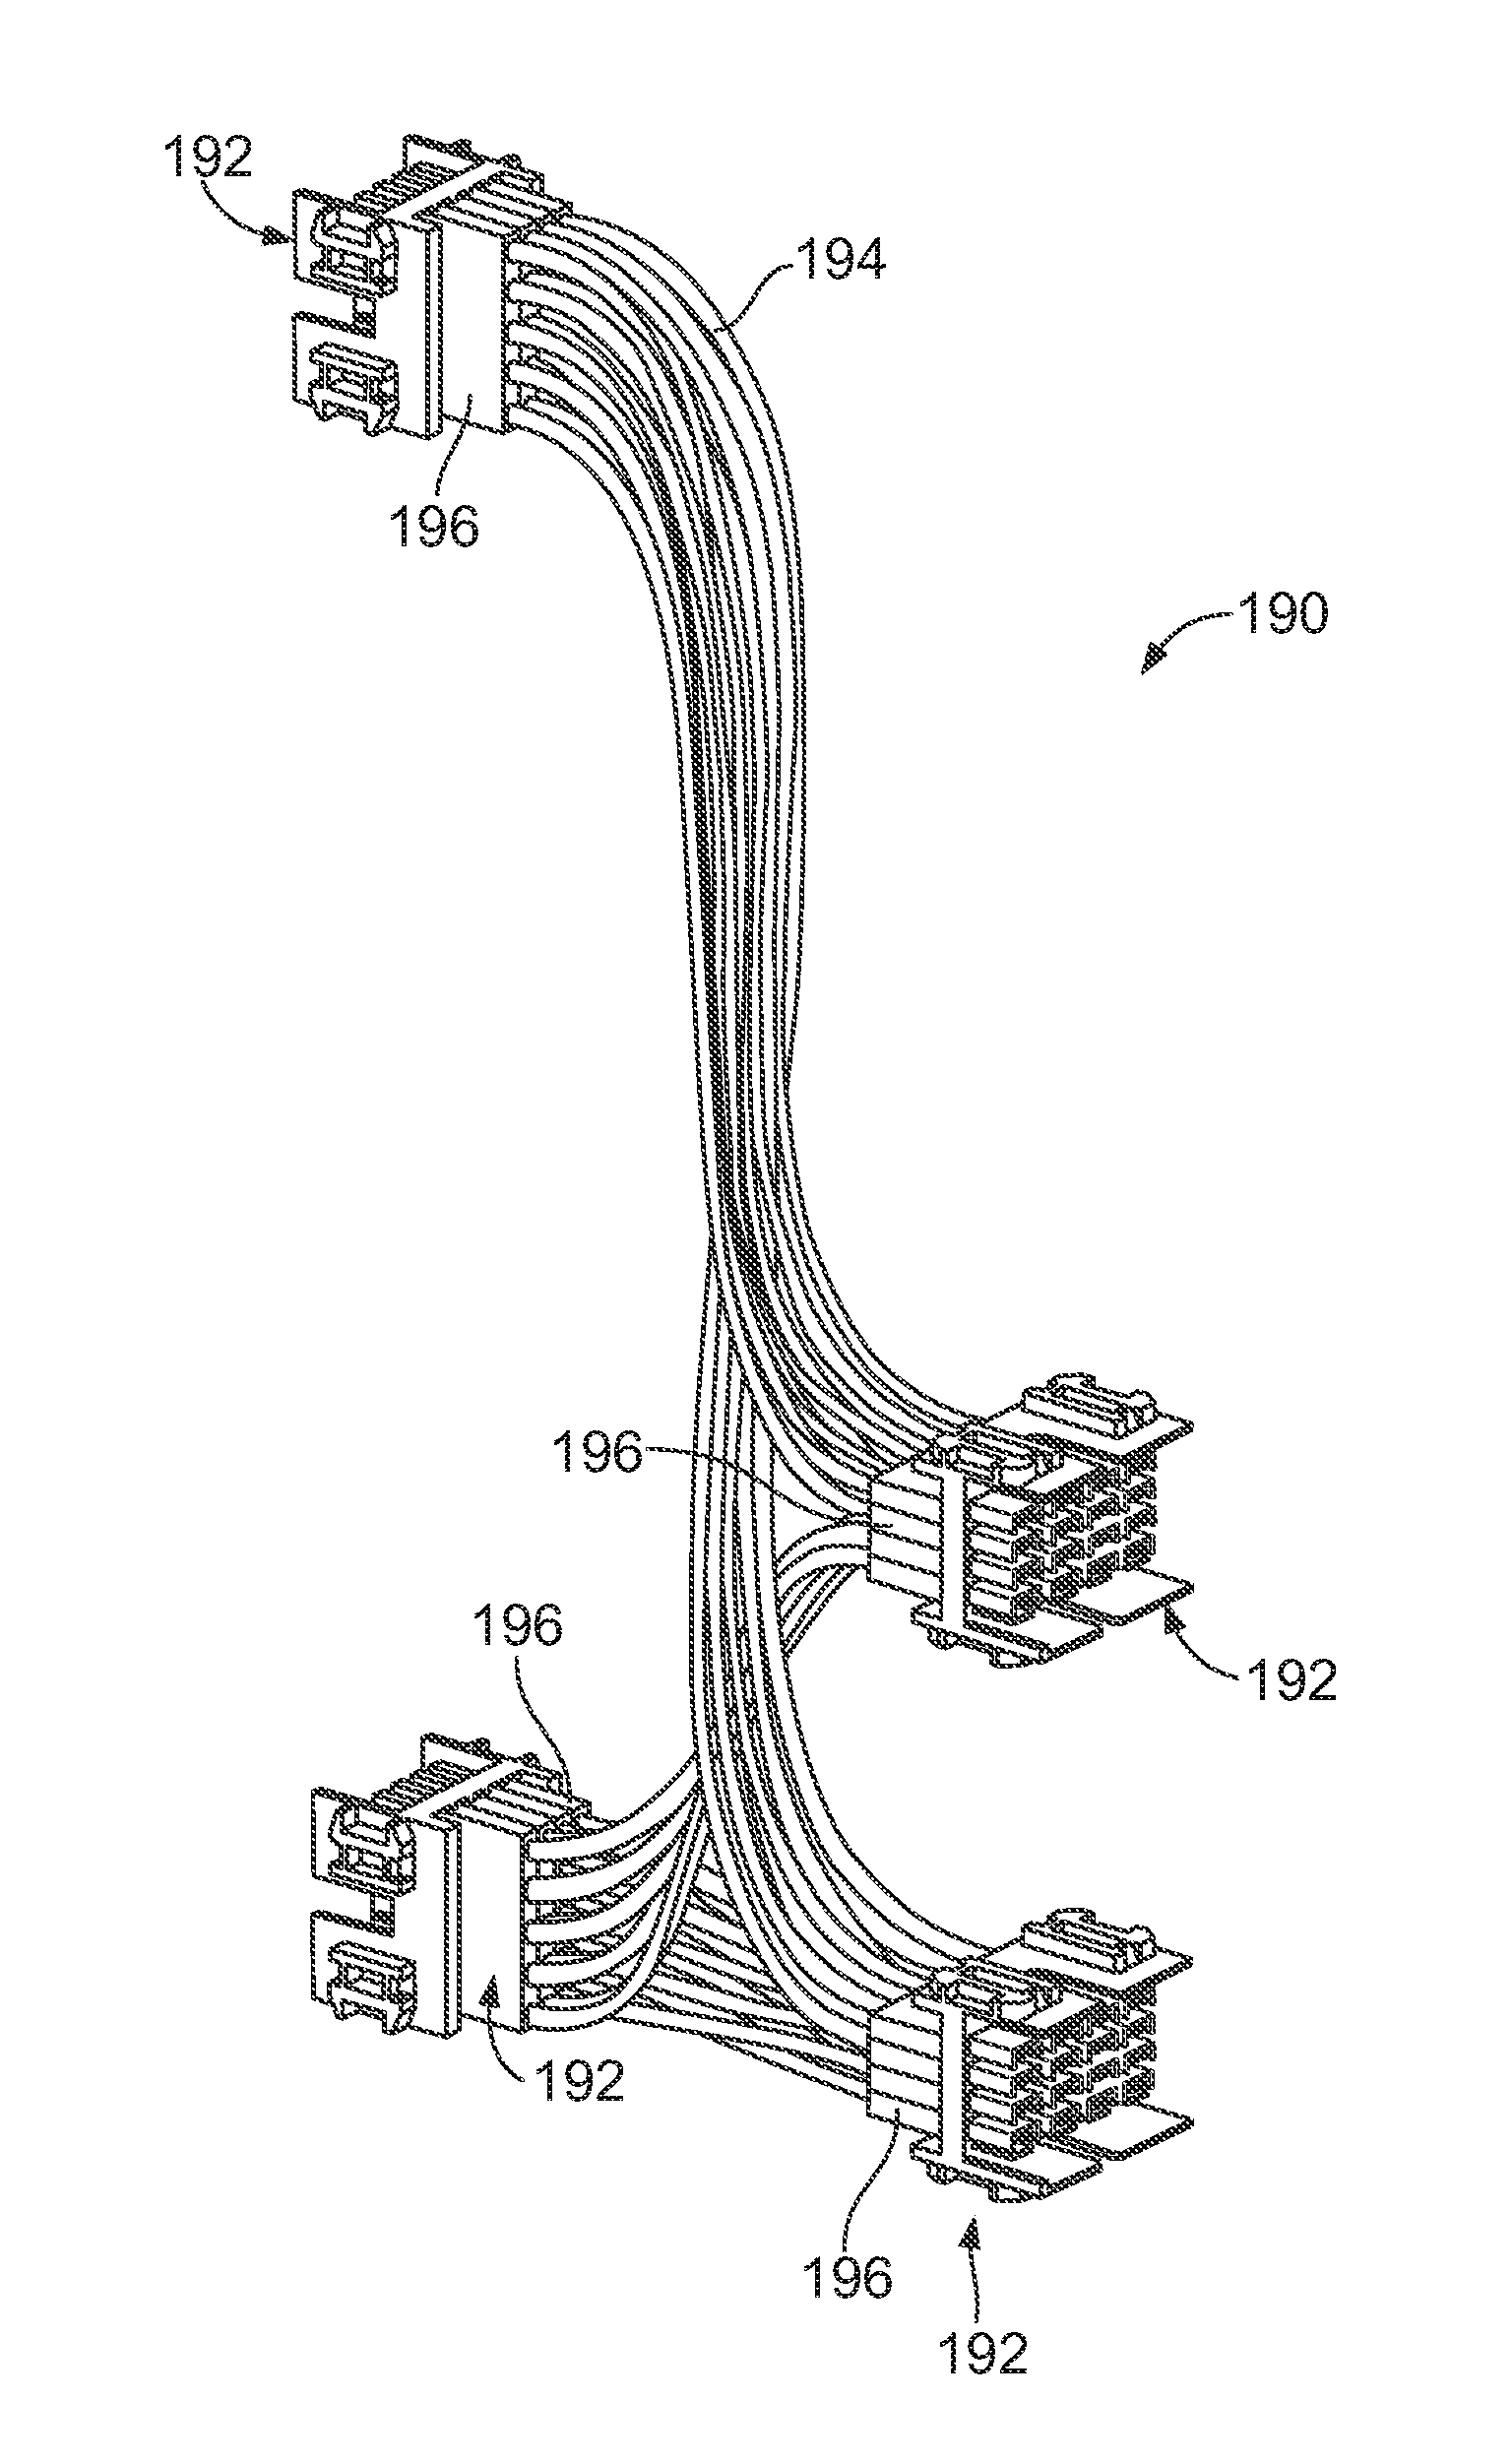 Cable backplane system having a strain relief component